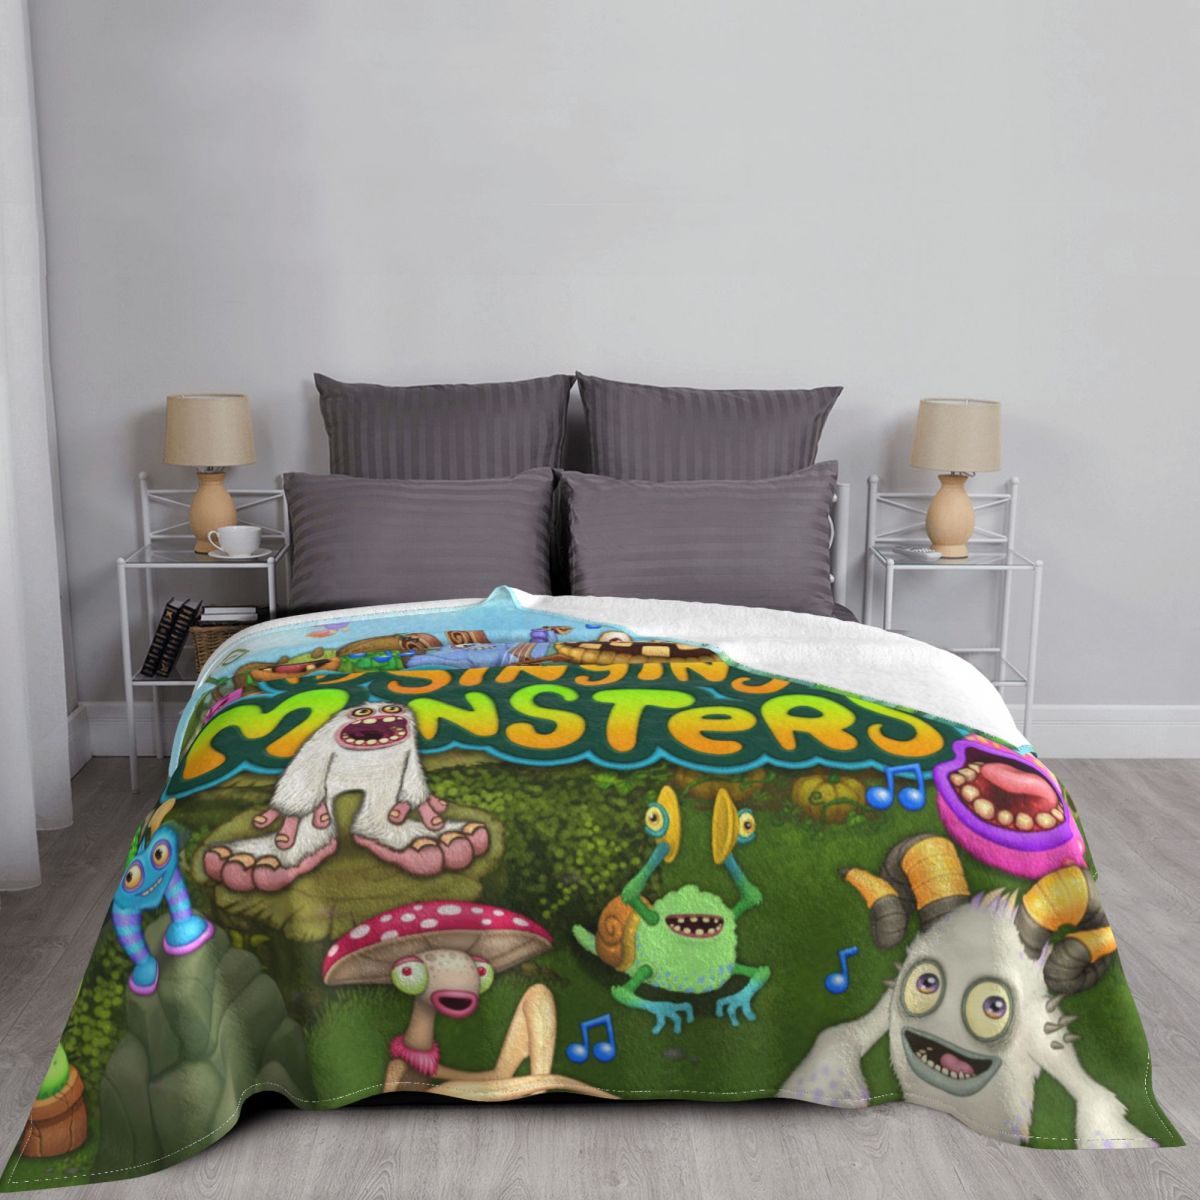 My Singing Monsters Blanket Game Cartoon Flannel Awesome Warm Throw Blanket for Bedspread Autumn Winter 2 - My Singing Monsters Plush